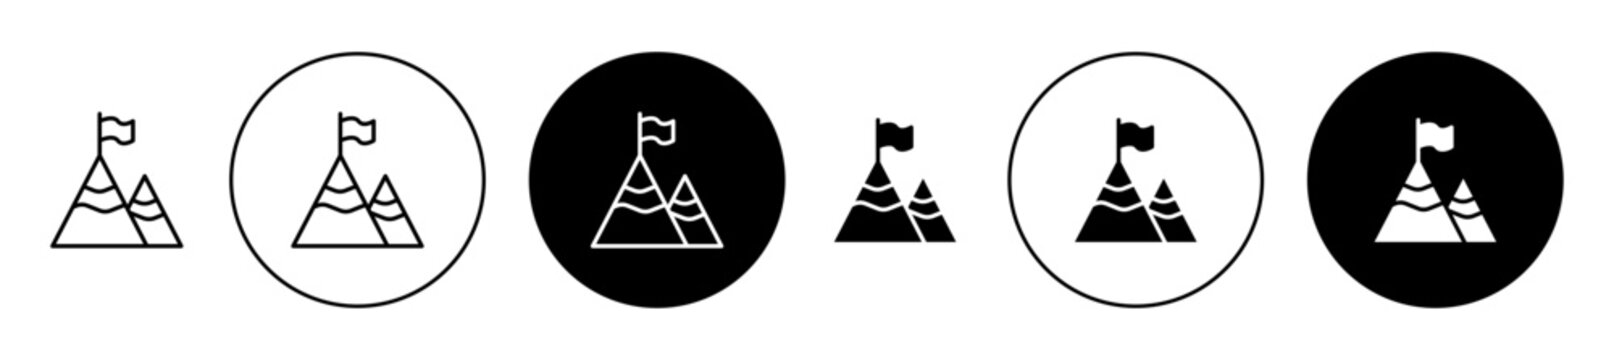 Flag on mountain top icon vector icon set in black color. Suitable for apps and website UI designs